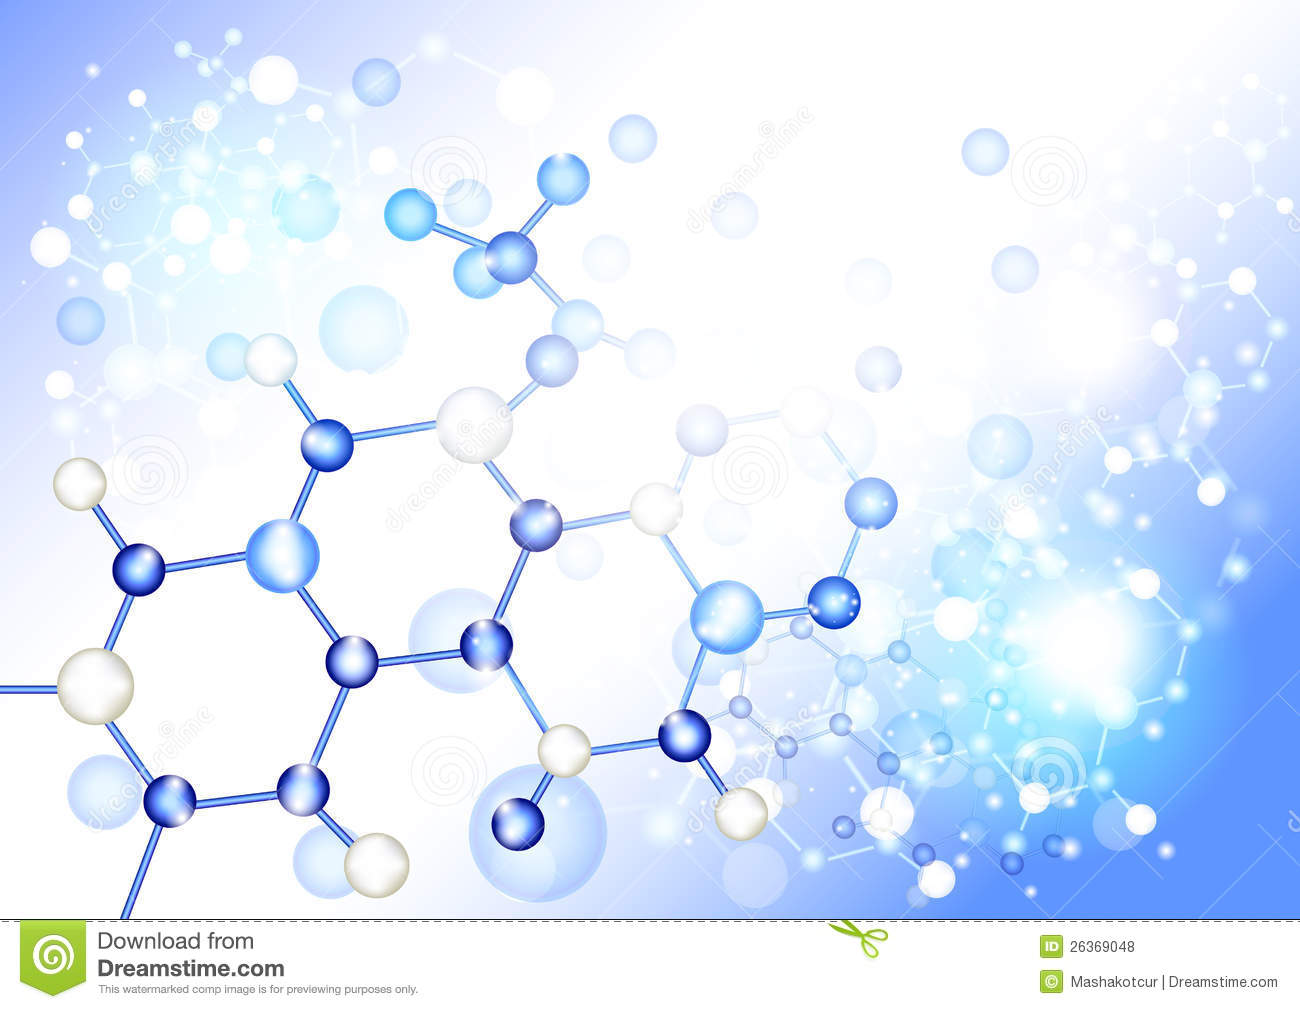 Chemistry Background Vector